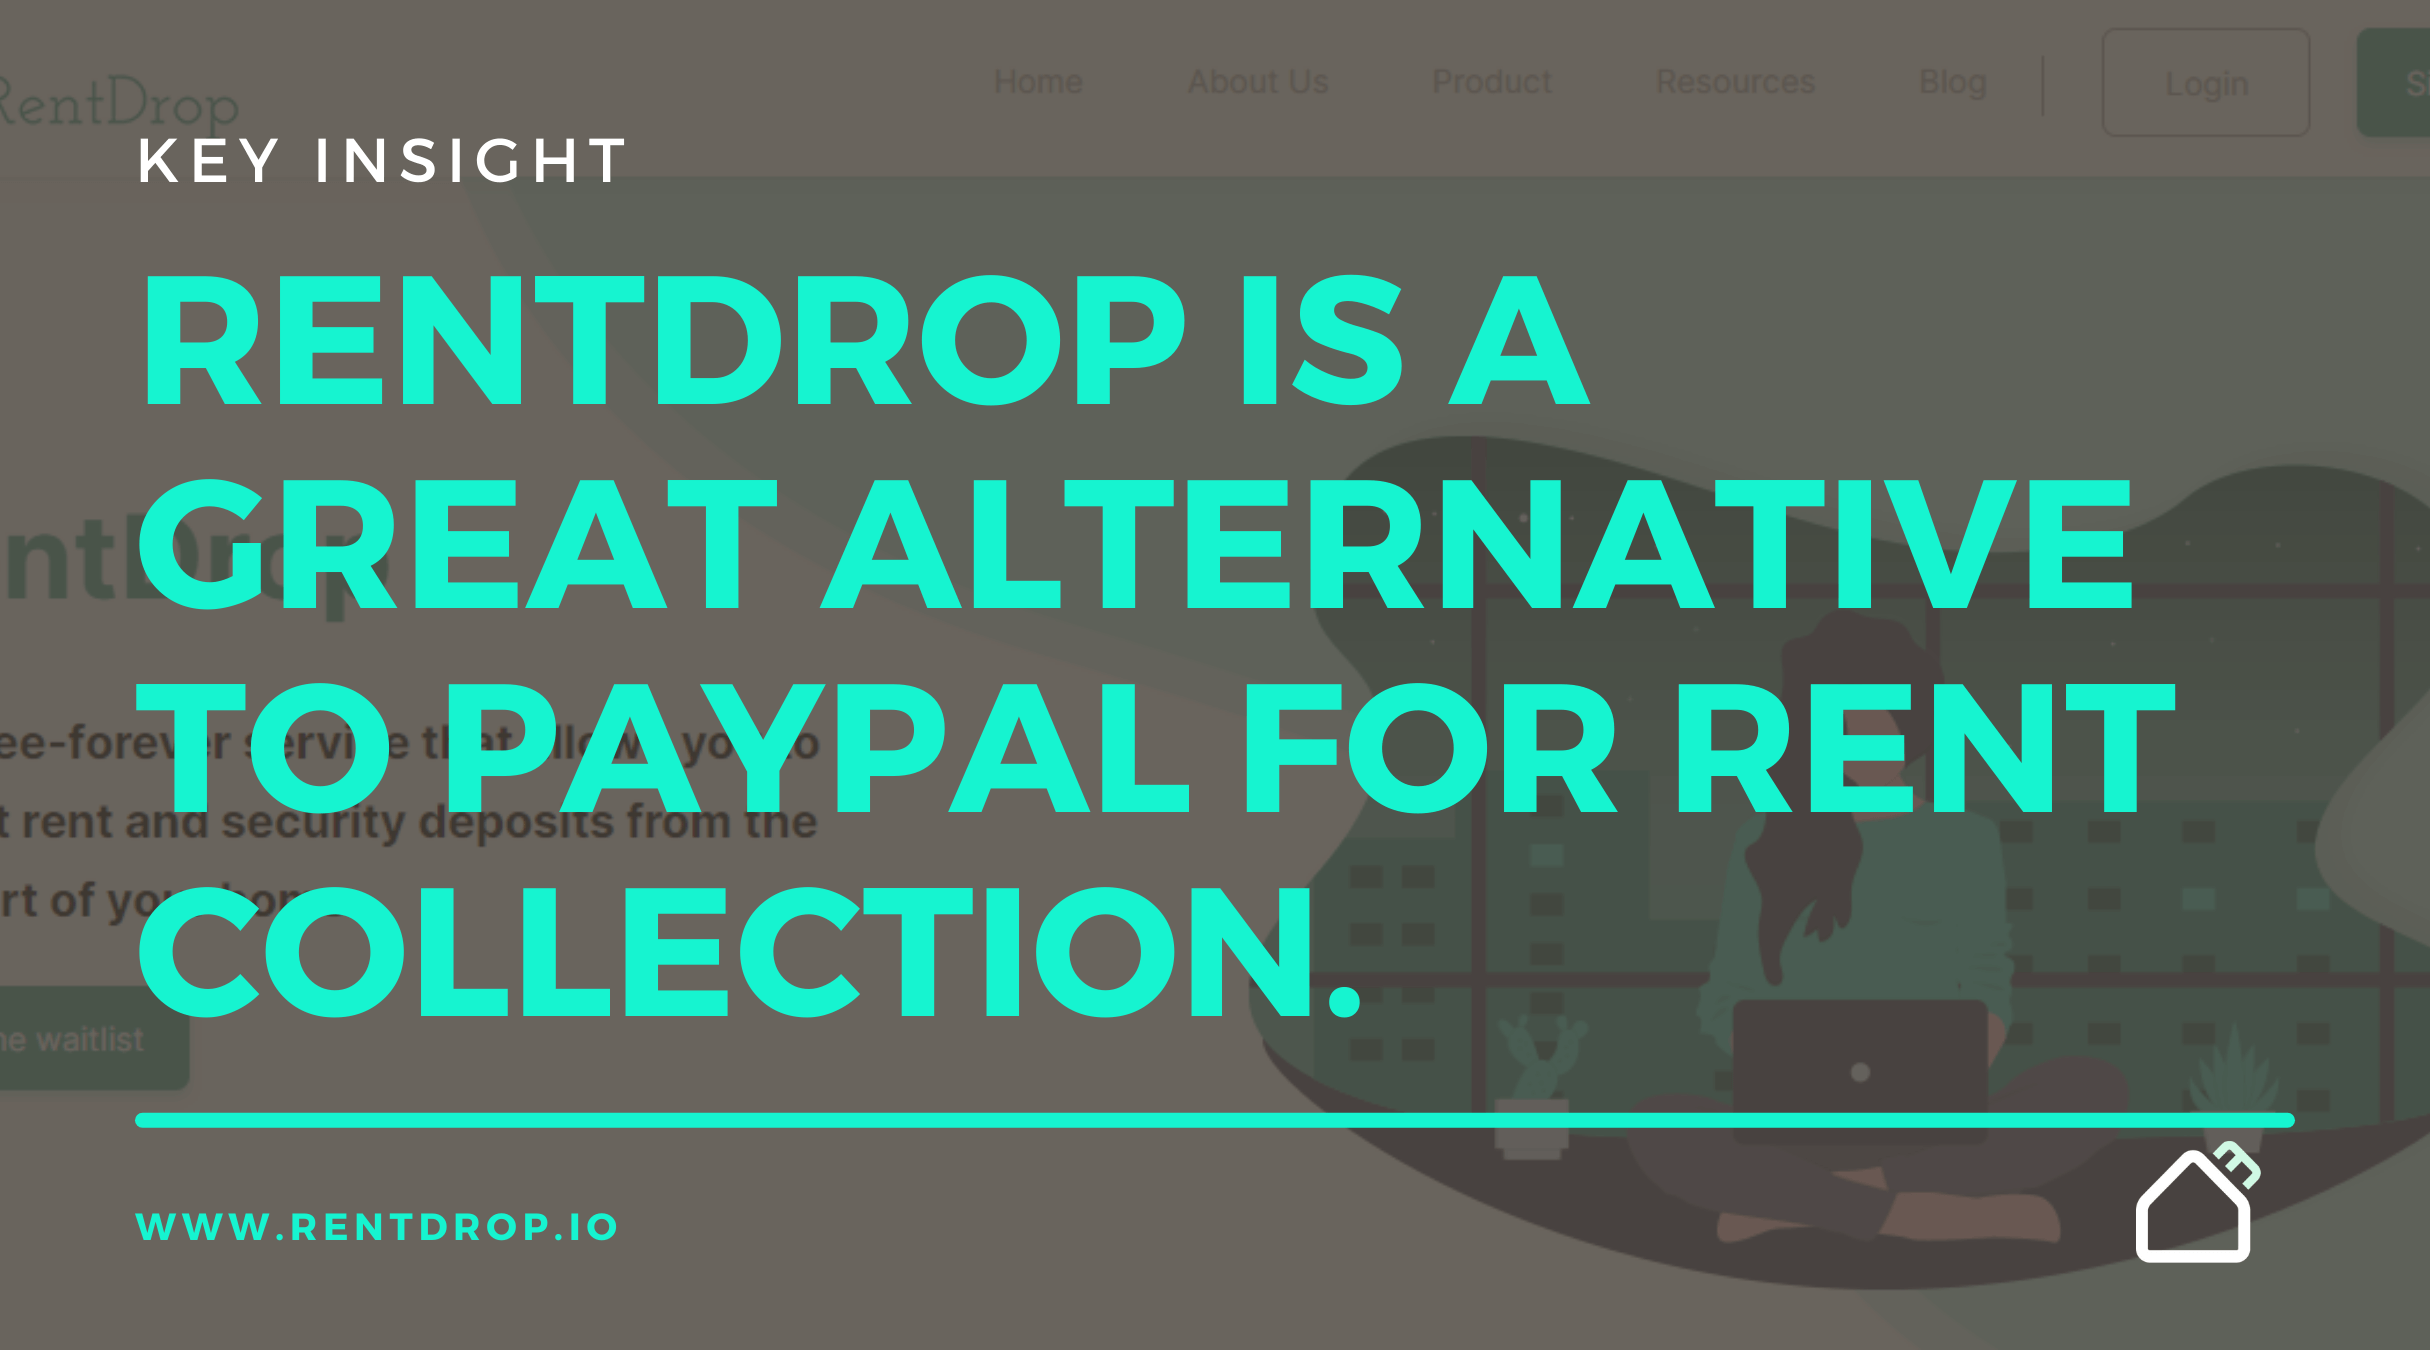 PayPal for rent collection rentdrop key insight